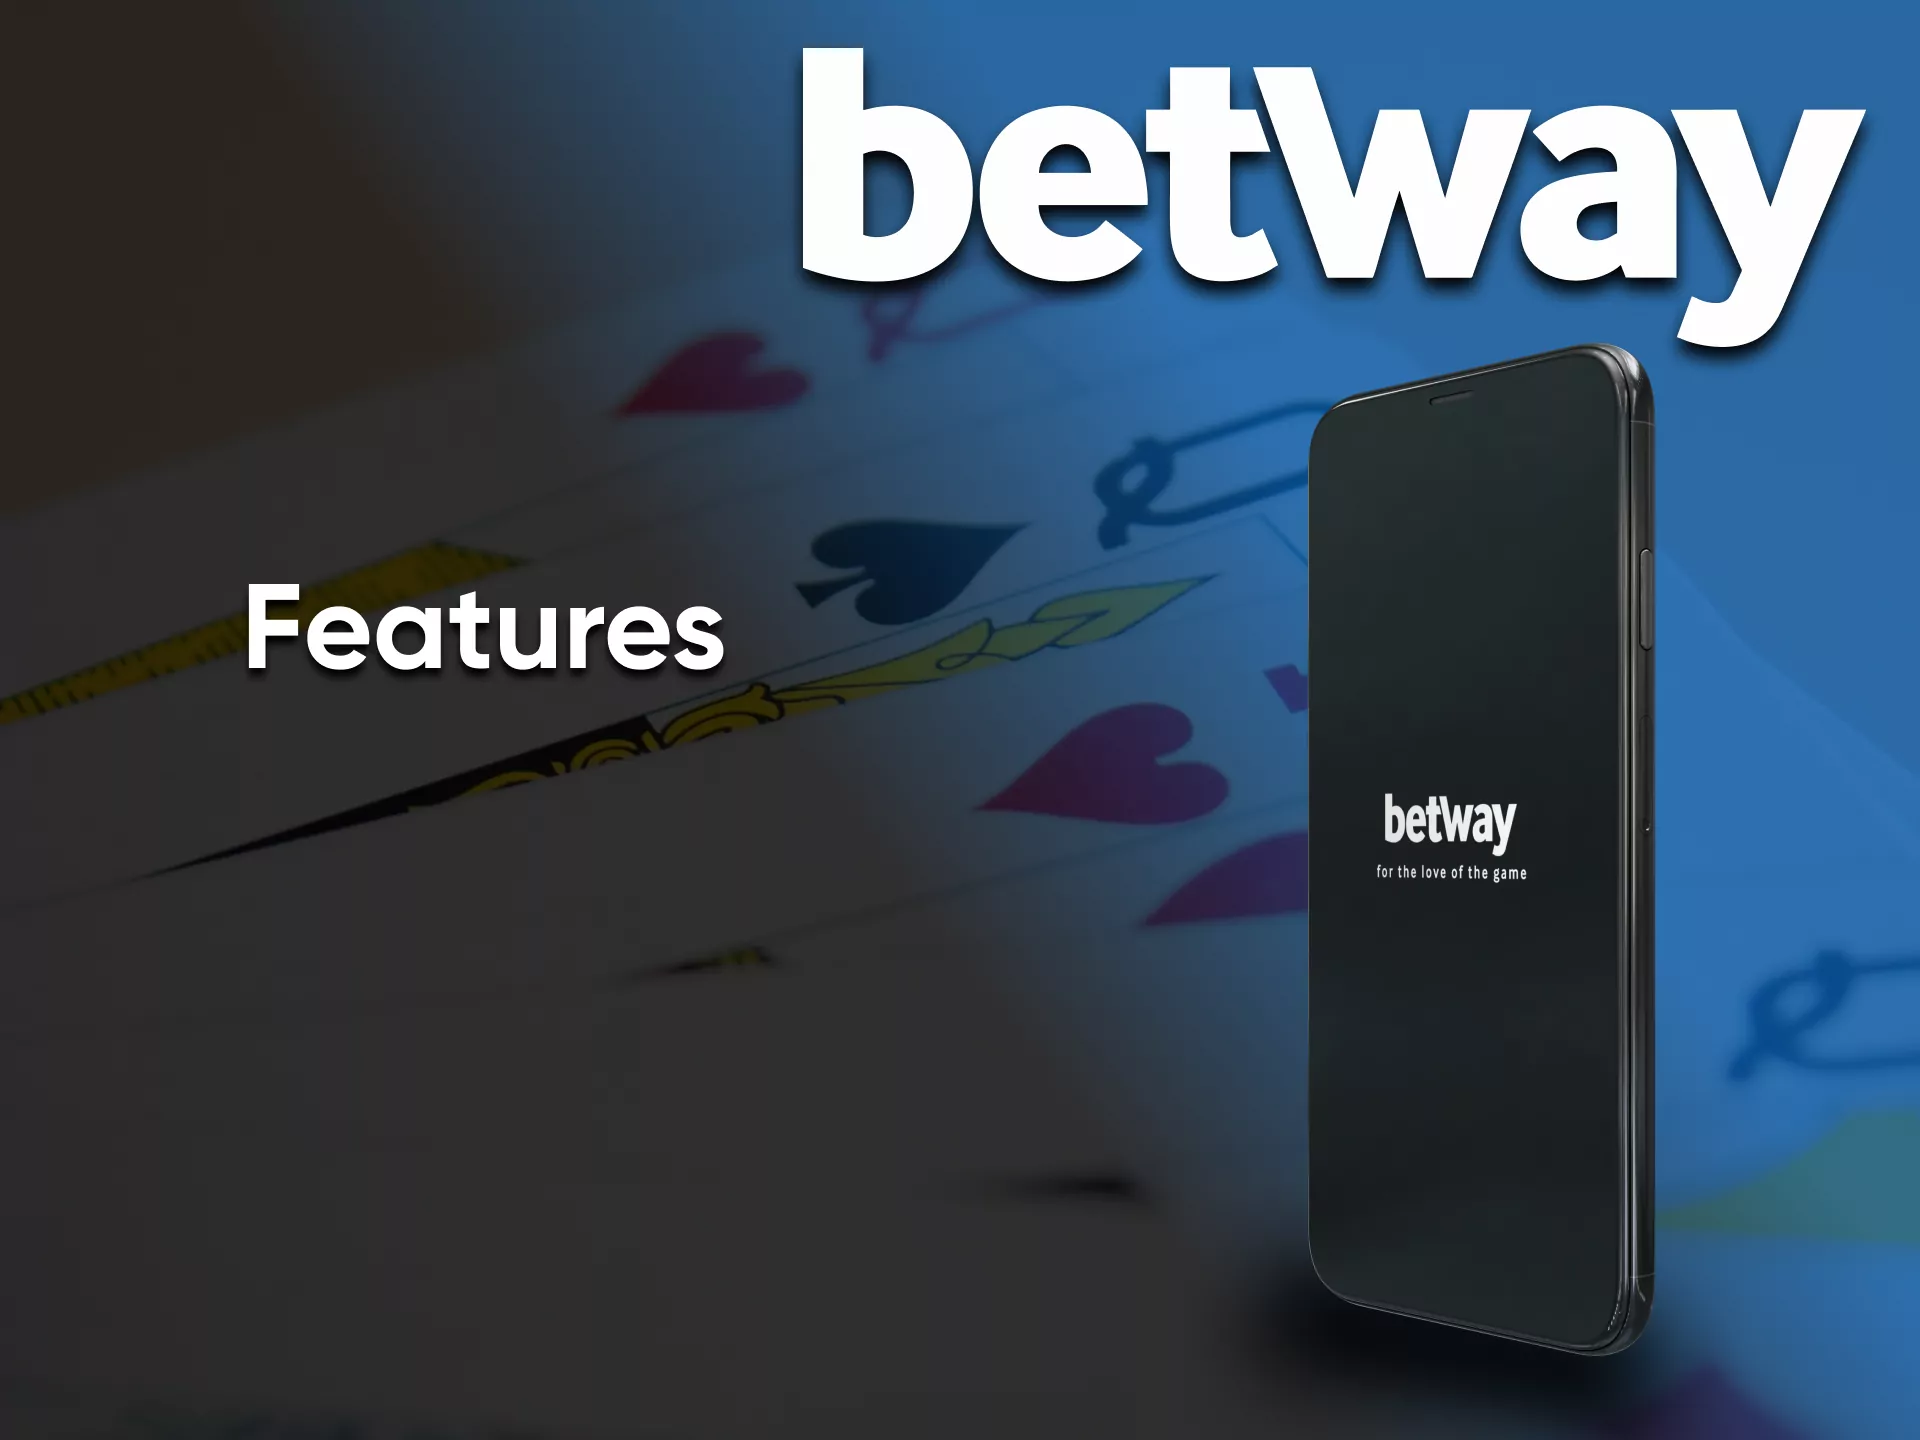 The team works to improve the Betway casino.